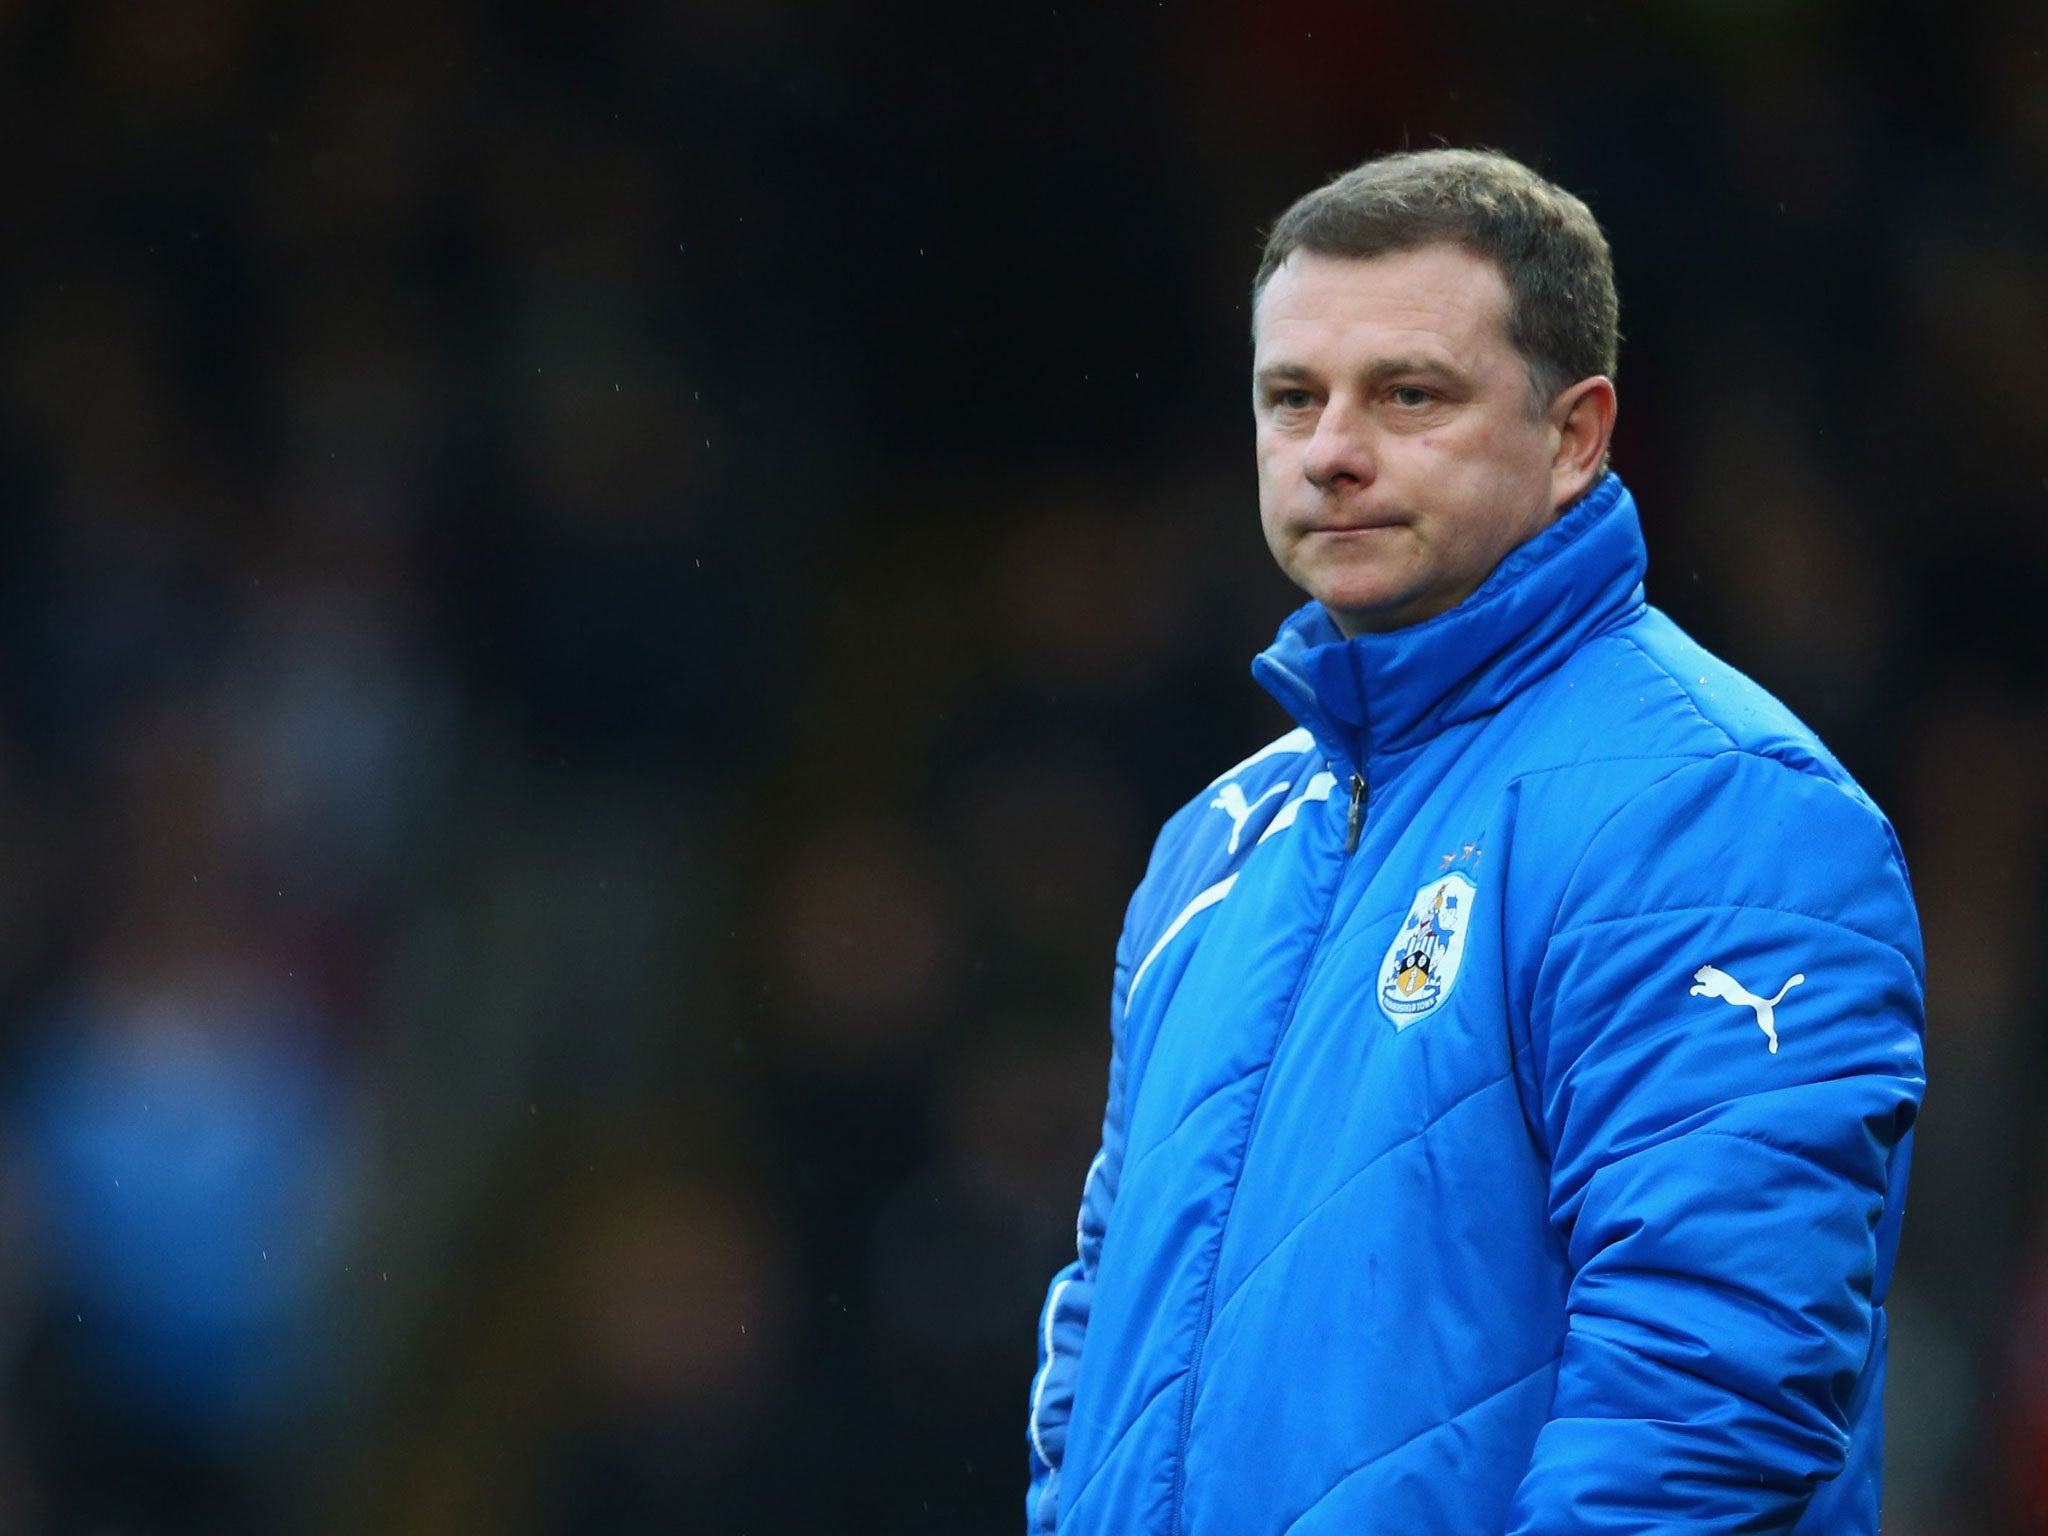 Mark Robins says he realised he really wanted to be a manager after overseeing a 5-1 home defeat